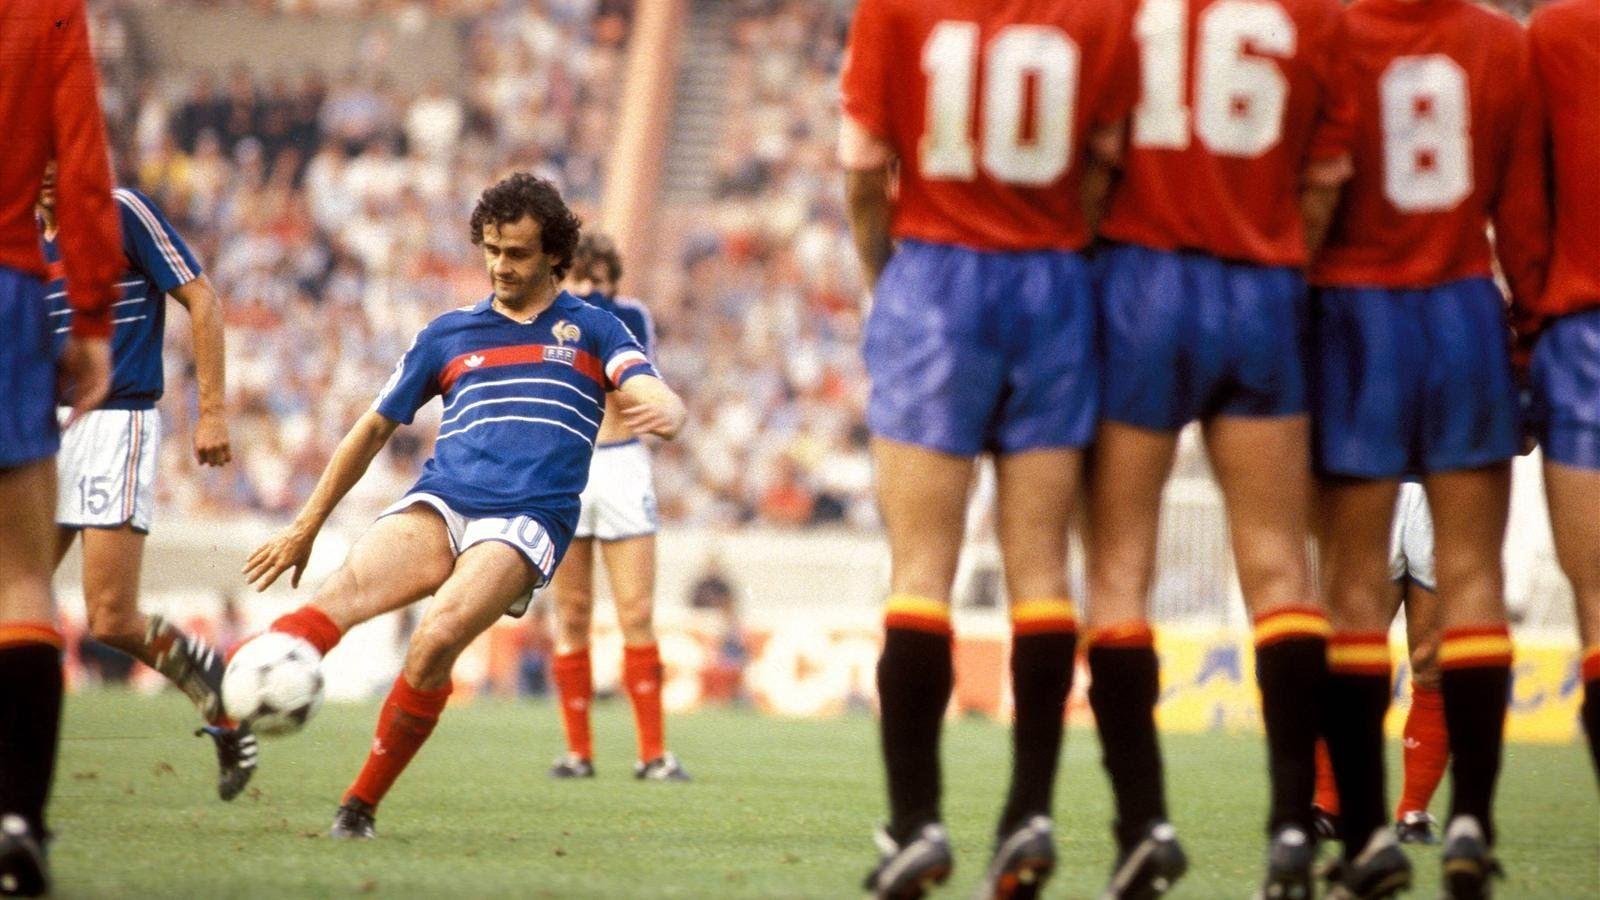  Michel Platini is seen scoring a goal against Spain in the Euro 84 tournament, wearing a blue jersey with white shorts and blue socks while the Spanish defenders wear red jerseys with blue shorts and red socks.